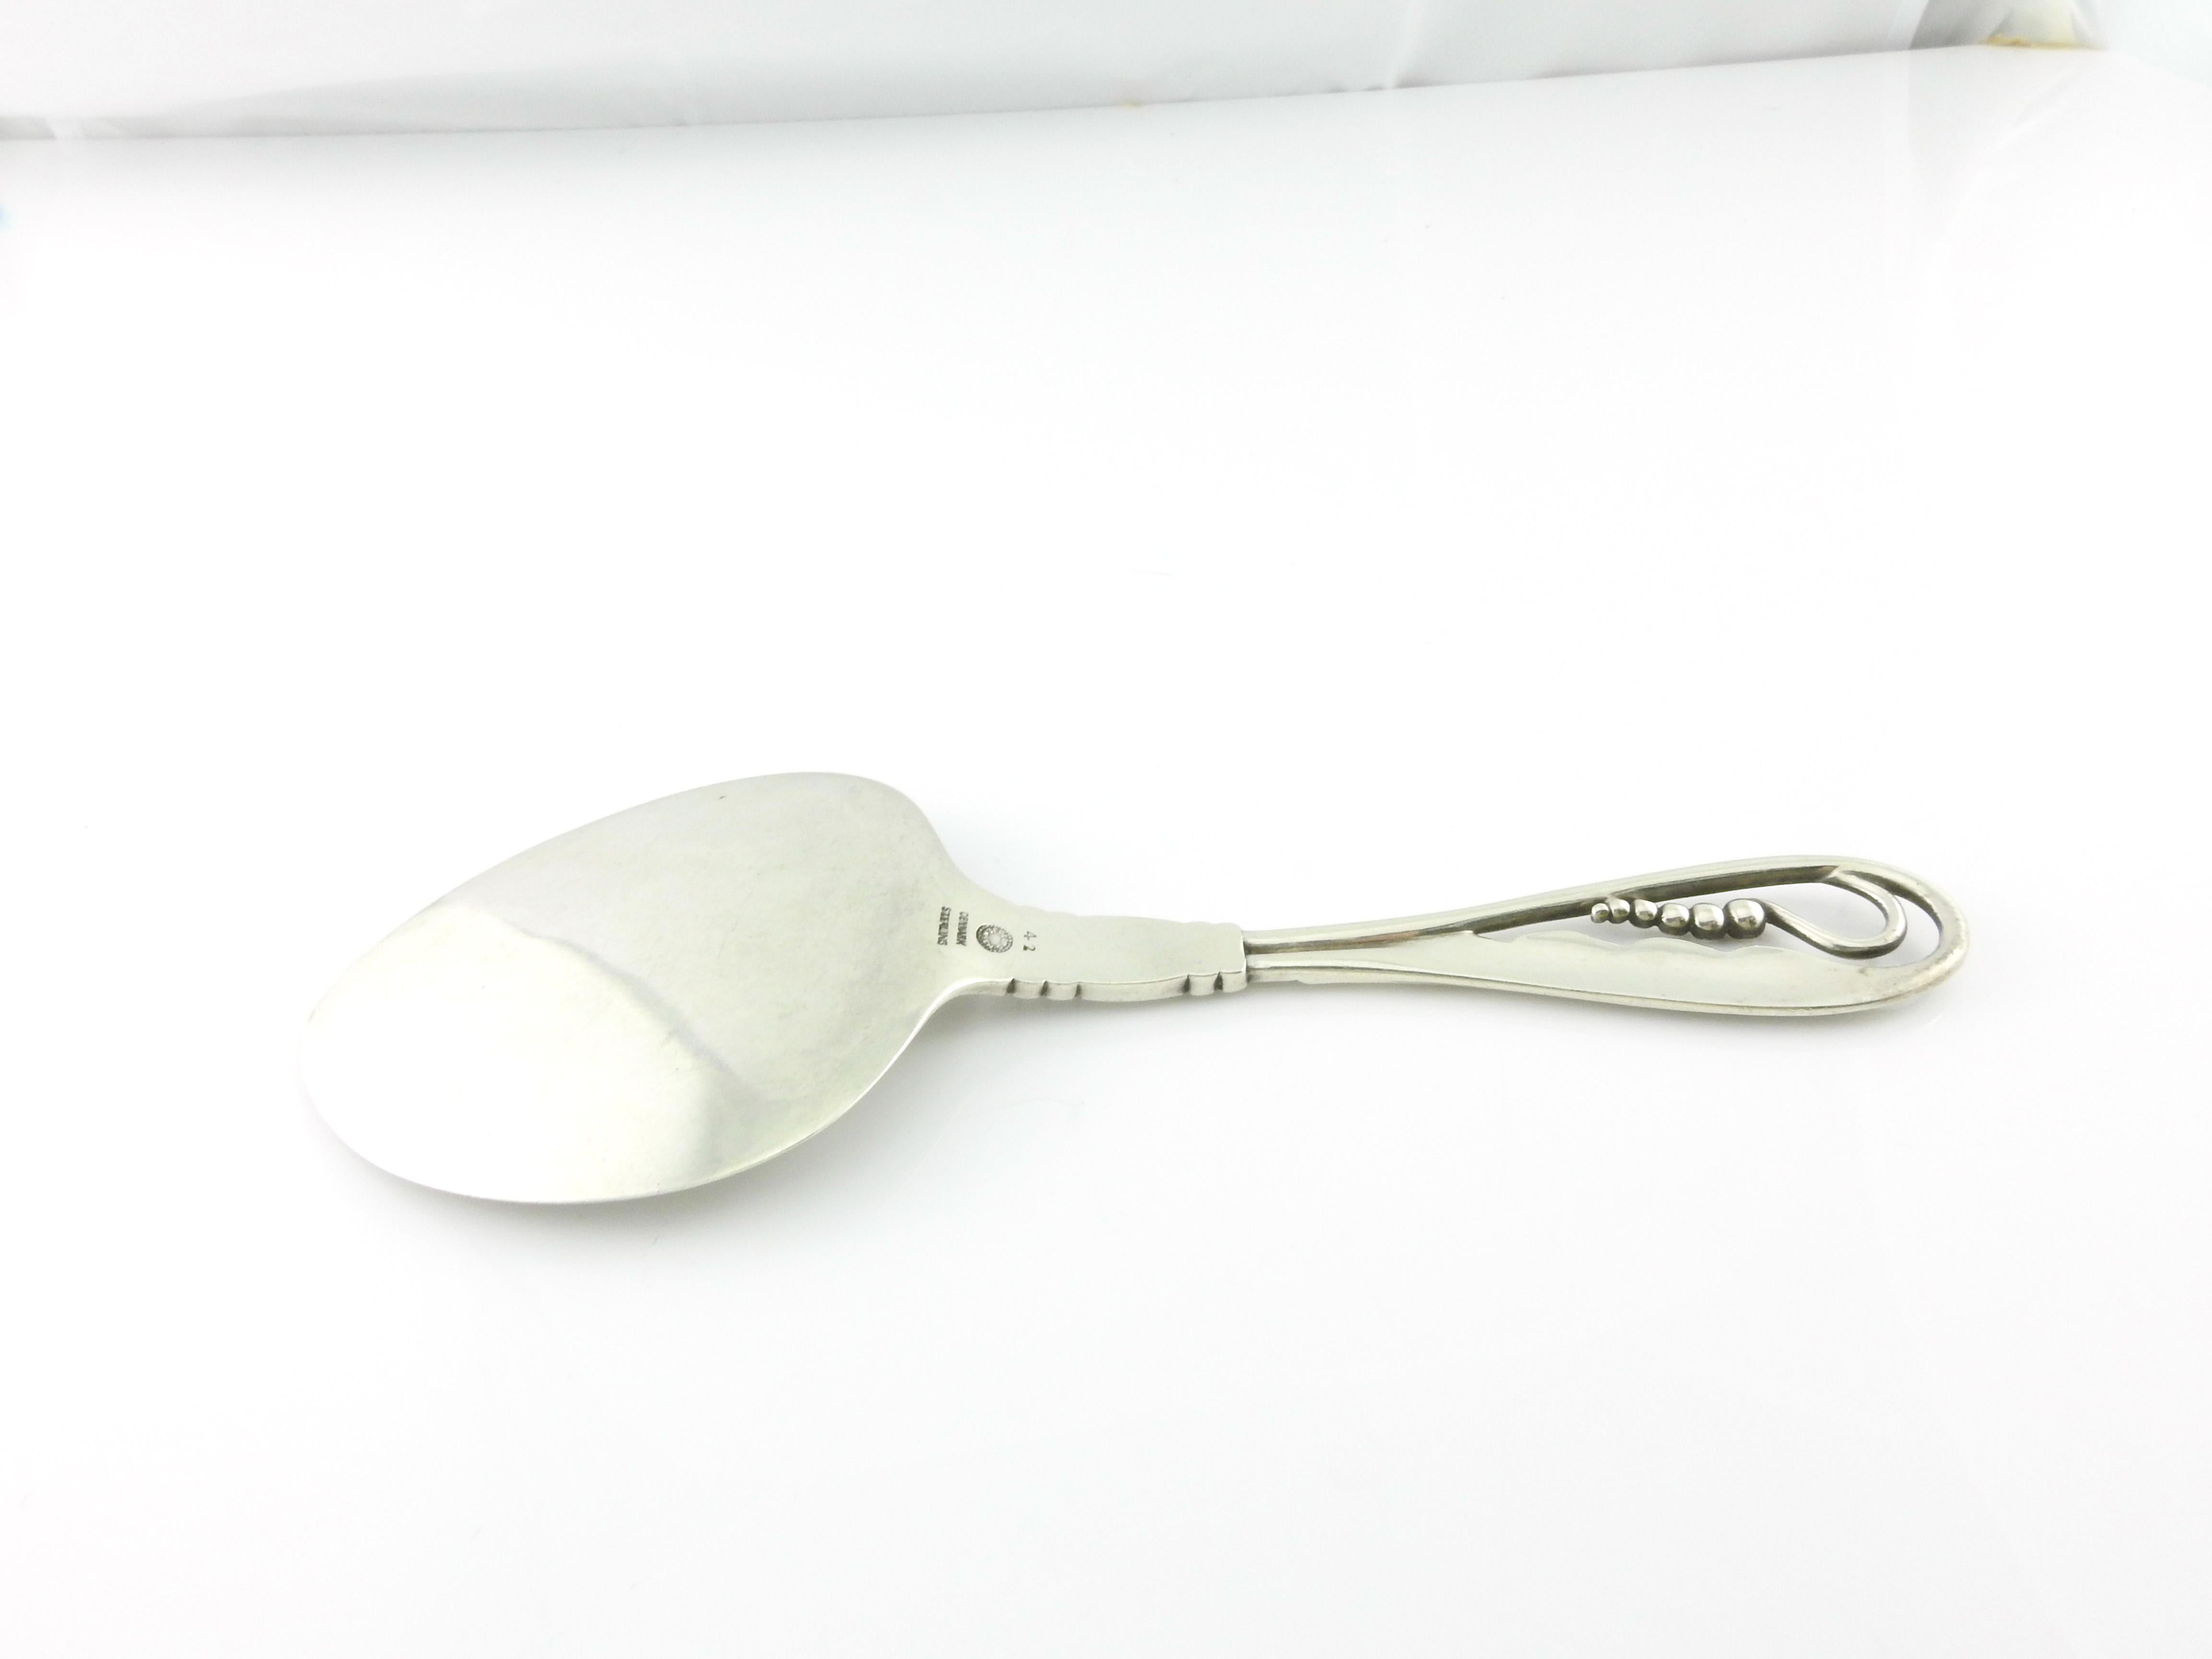 Georg Jensen Denmark Ornamental 42 Paté or Pastry Server In Good Condition For Sale In Washington Depot, CT